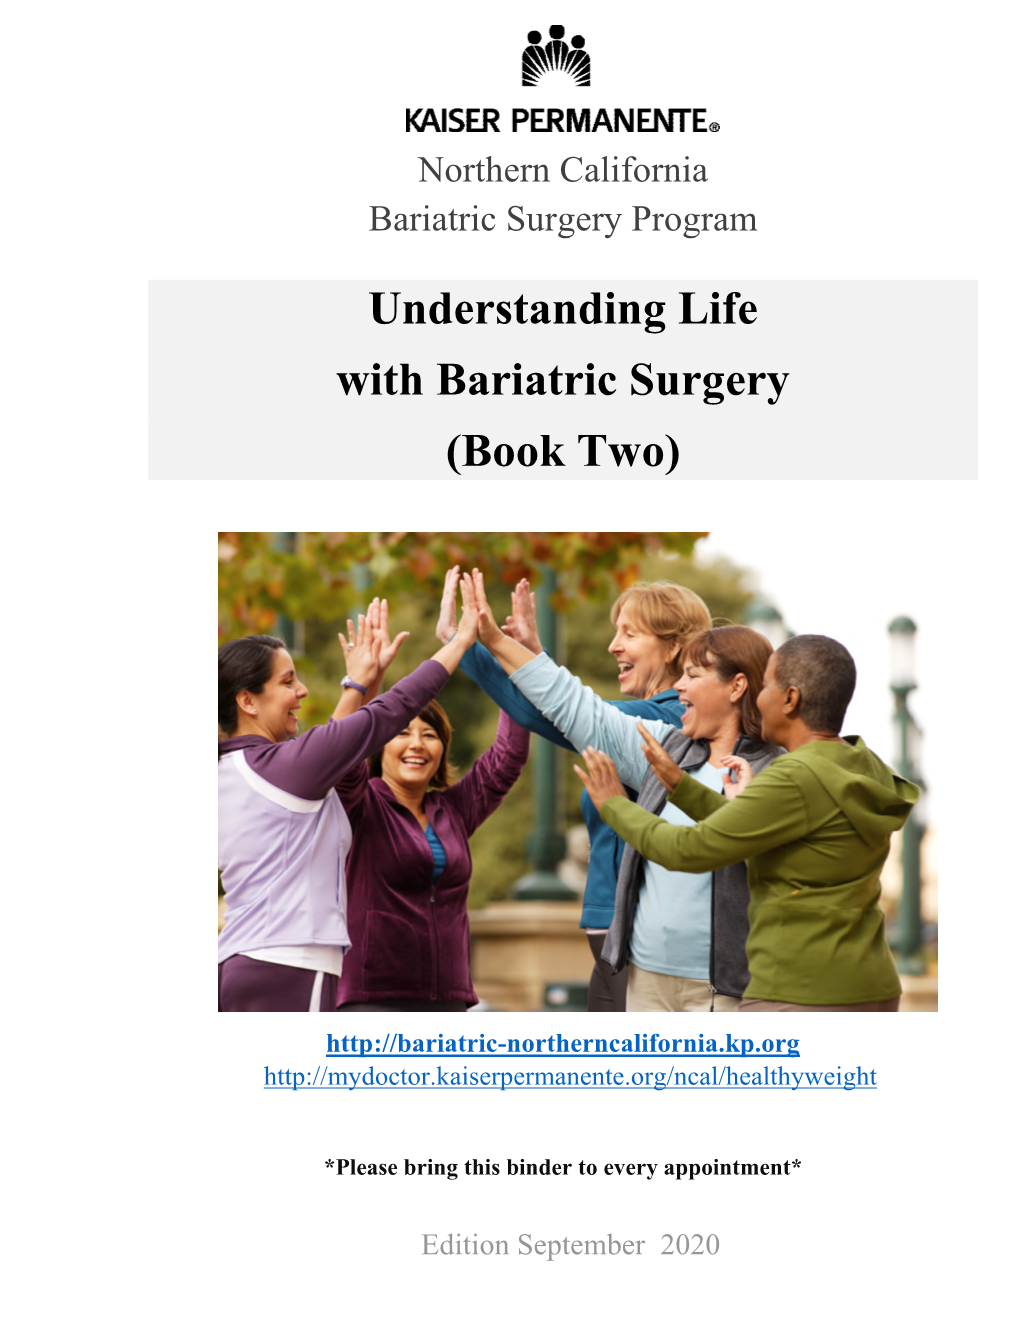 Understanding Life with Bariatric Surgery (Book Two)